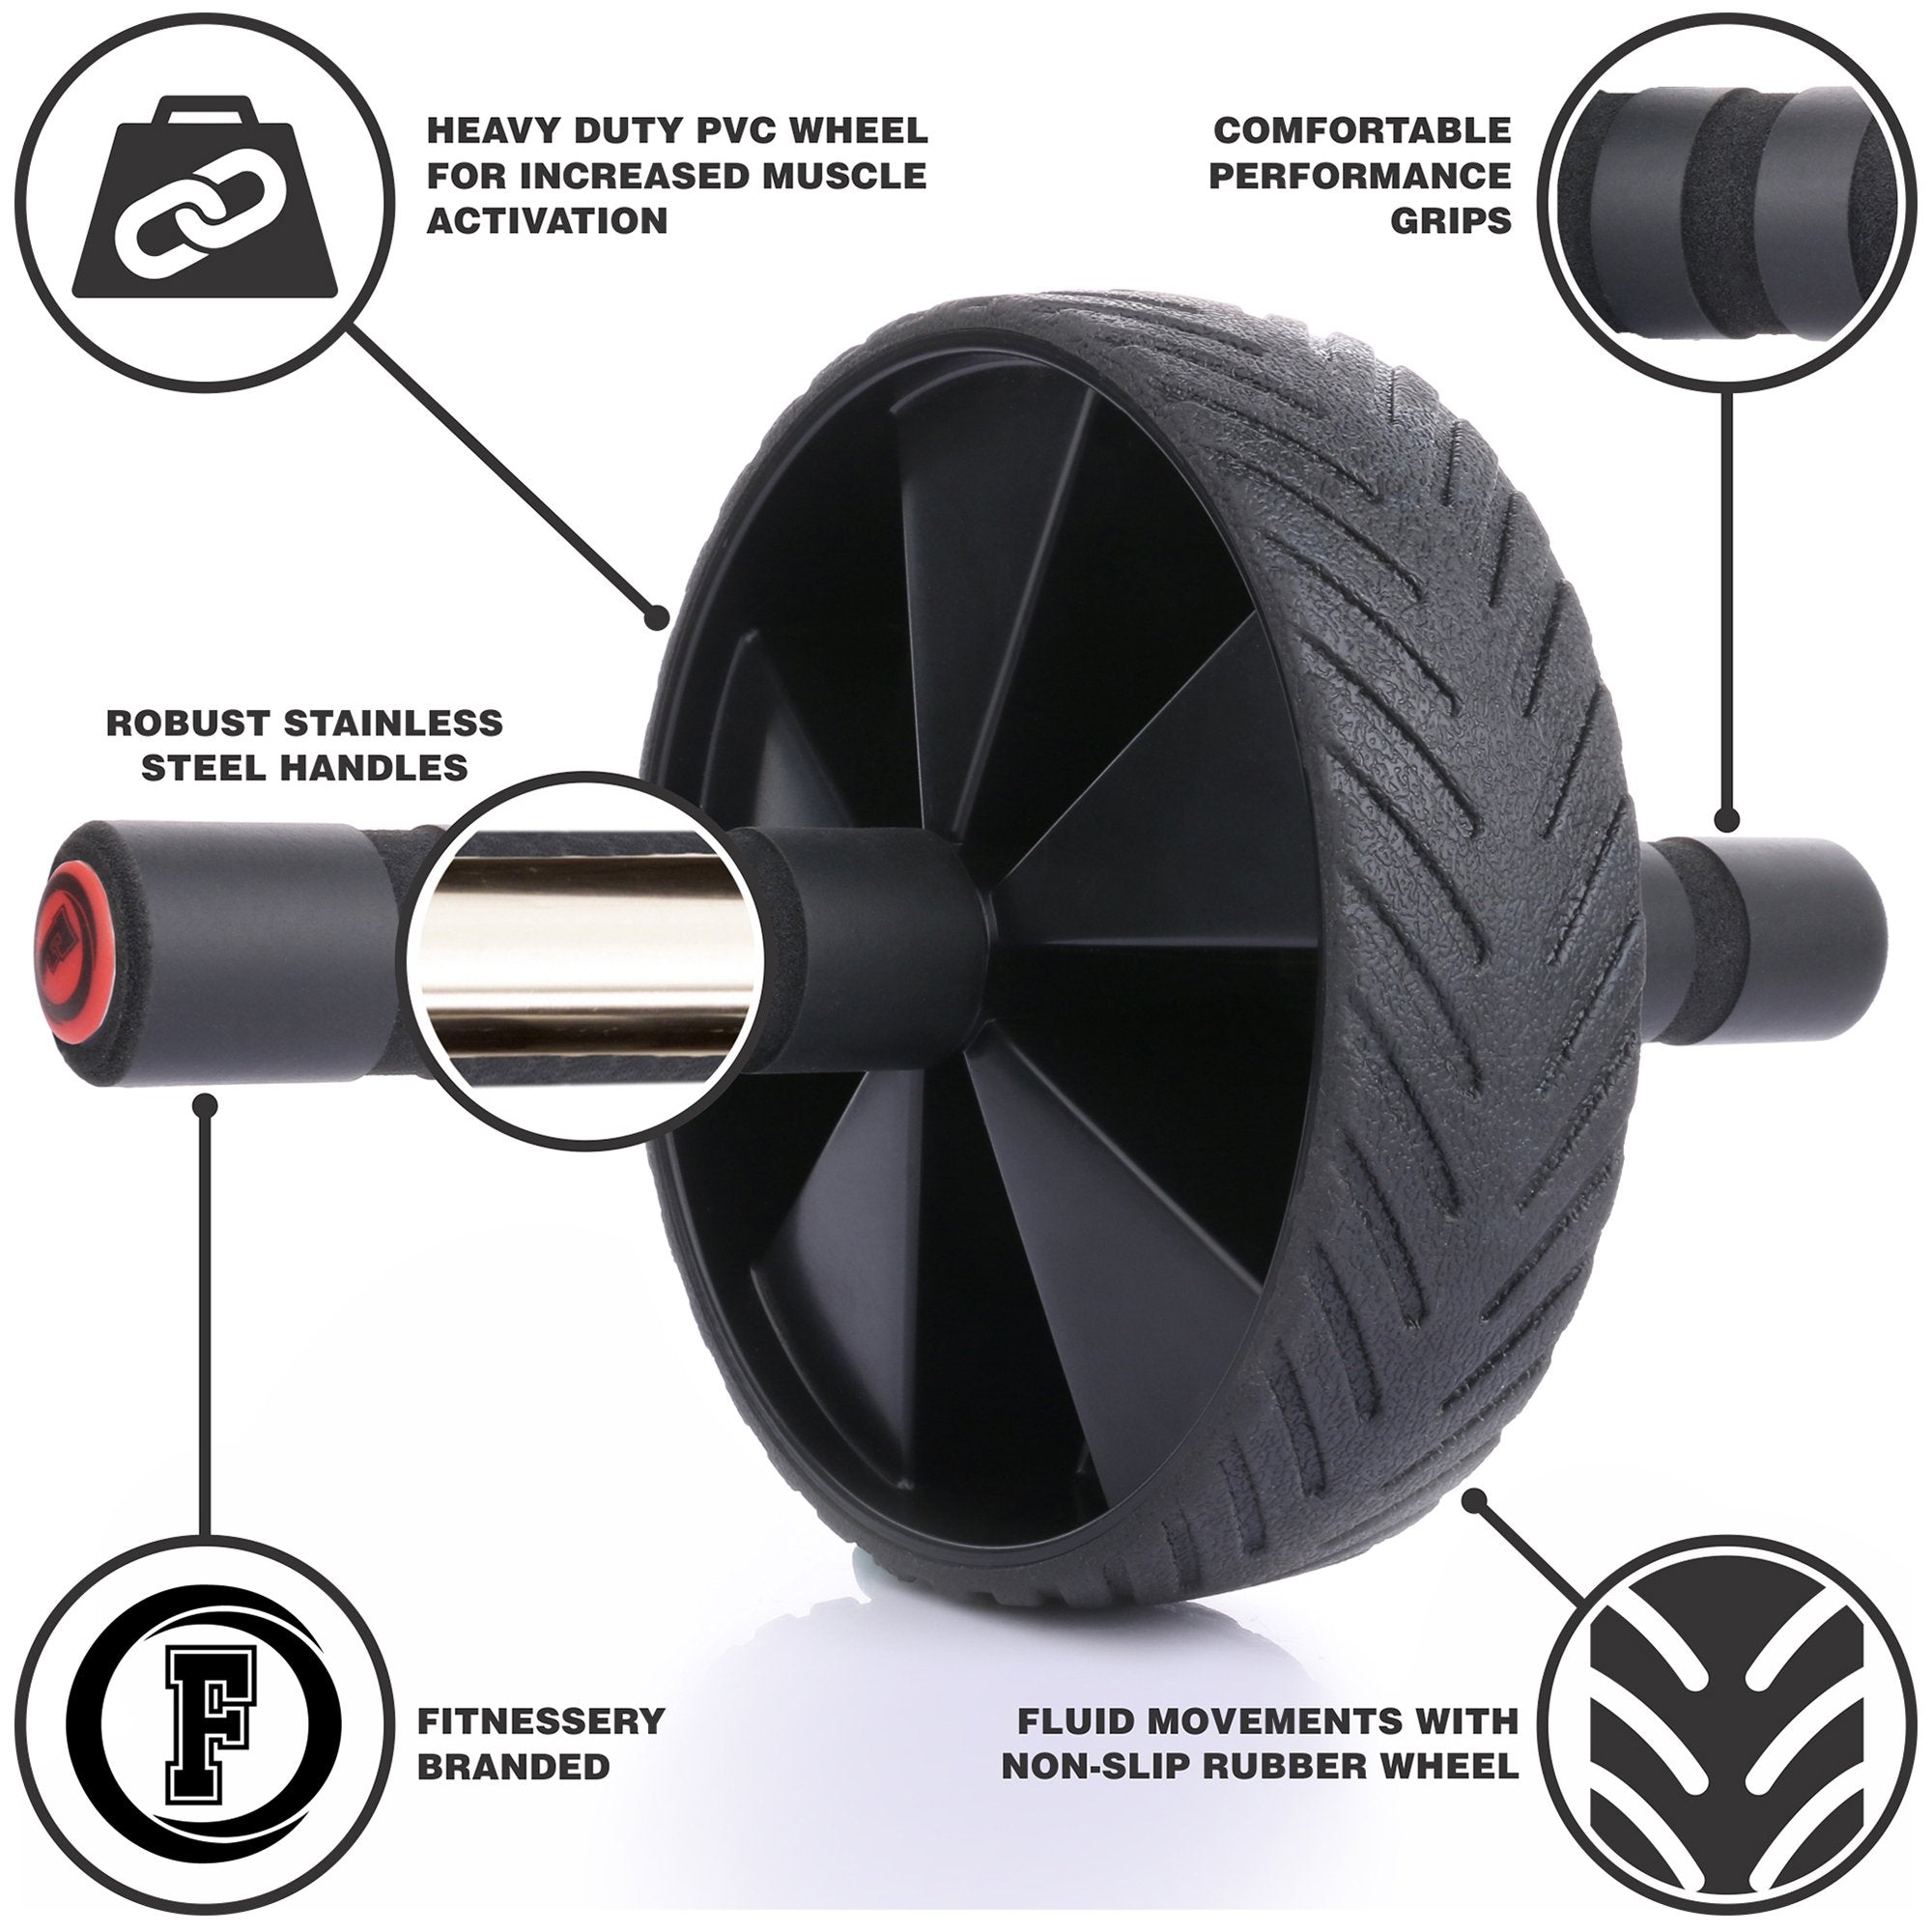 Ab Roller for Abs Workout - Ab Roller Wheel Exercise Equipment - Ab Wheel Exercise Equipment - Ab Wheel Roller for Home Gym - Ab Machine for Ab Workout - Ab Workout Equipment - Abs Roller Ab Trainer